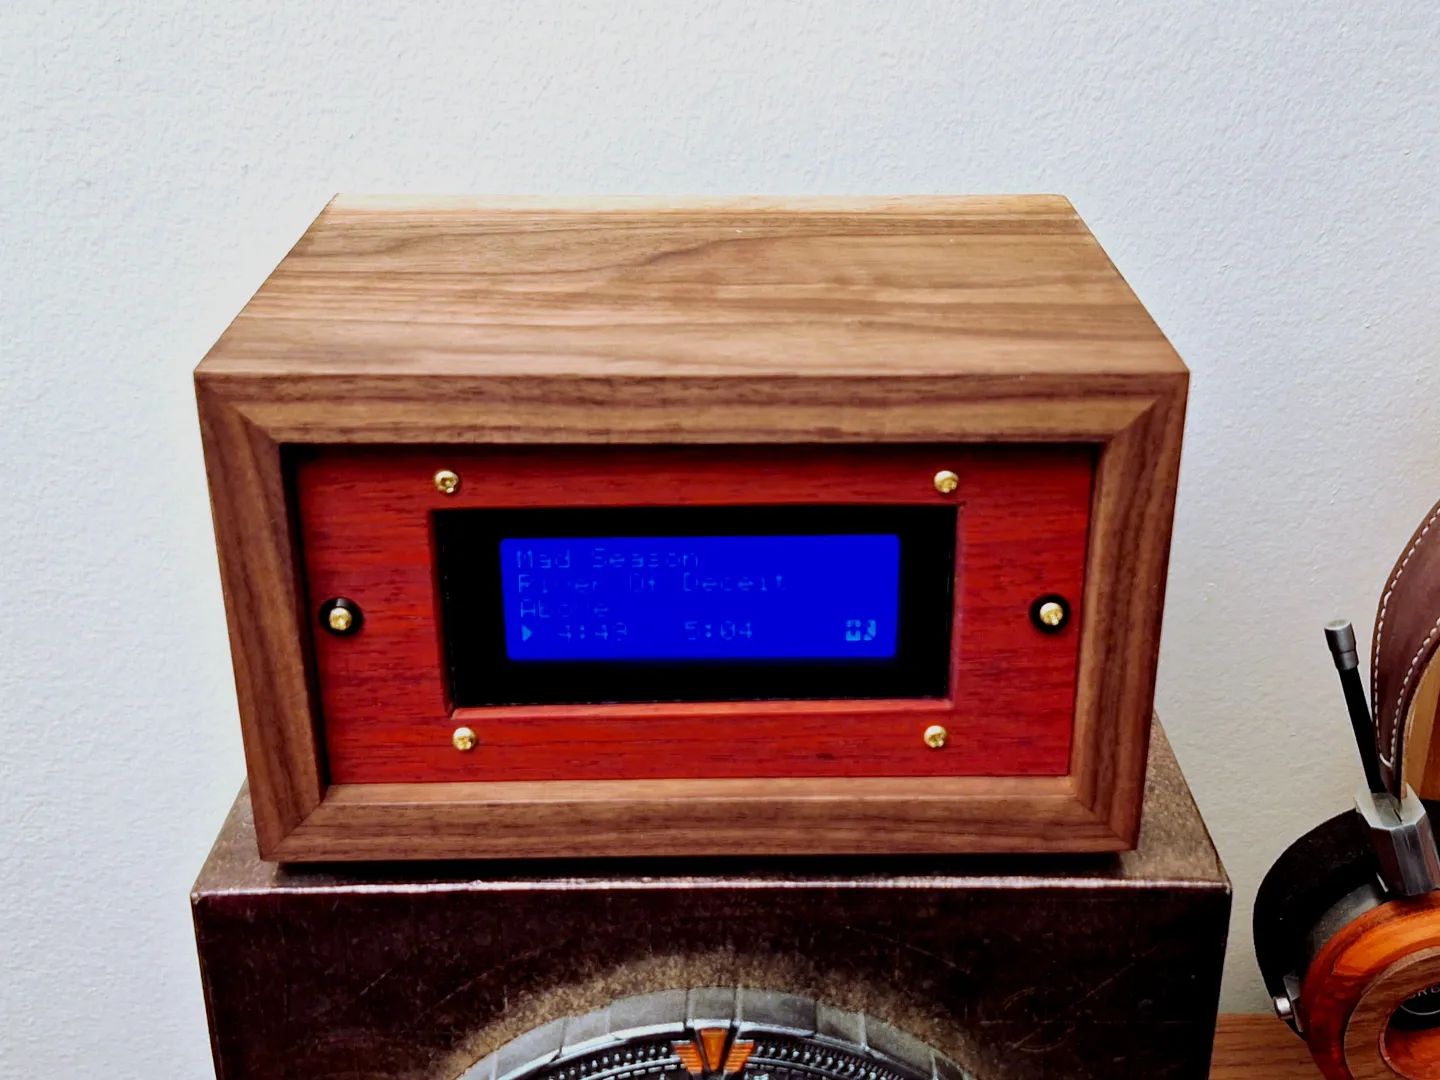 I switched the screws to brass, the two side screws have black washers and  Added some acrylic to the screen, adjusted its brightness, and added some rubber feet. #raspberrypi #walnut #padauk #raudio #brass